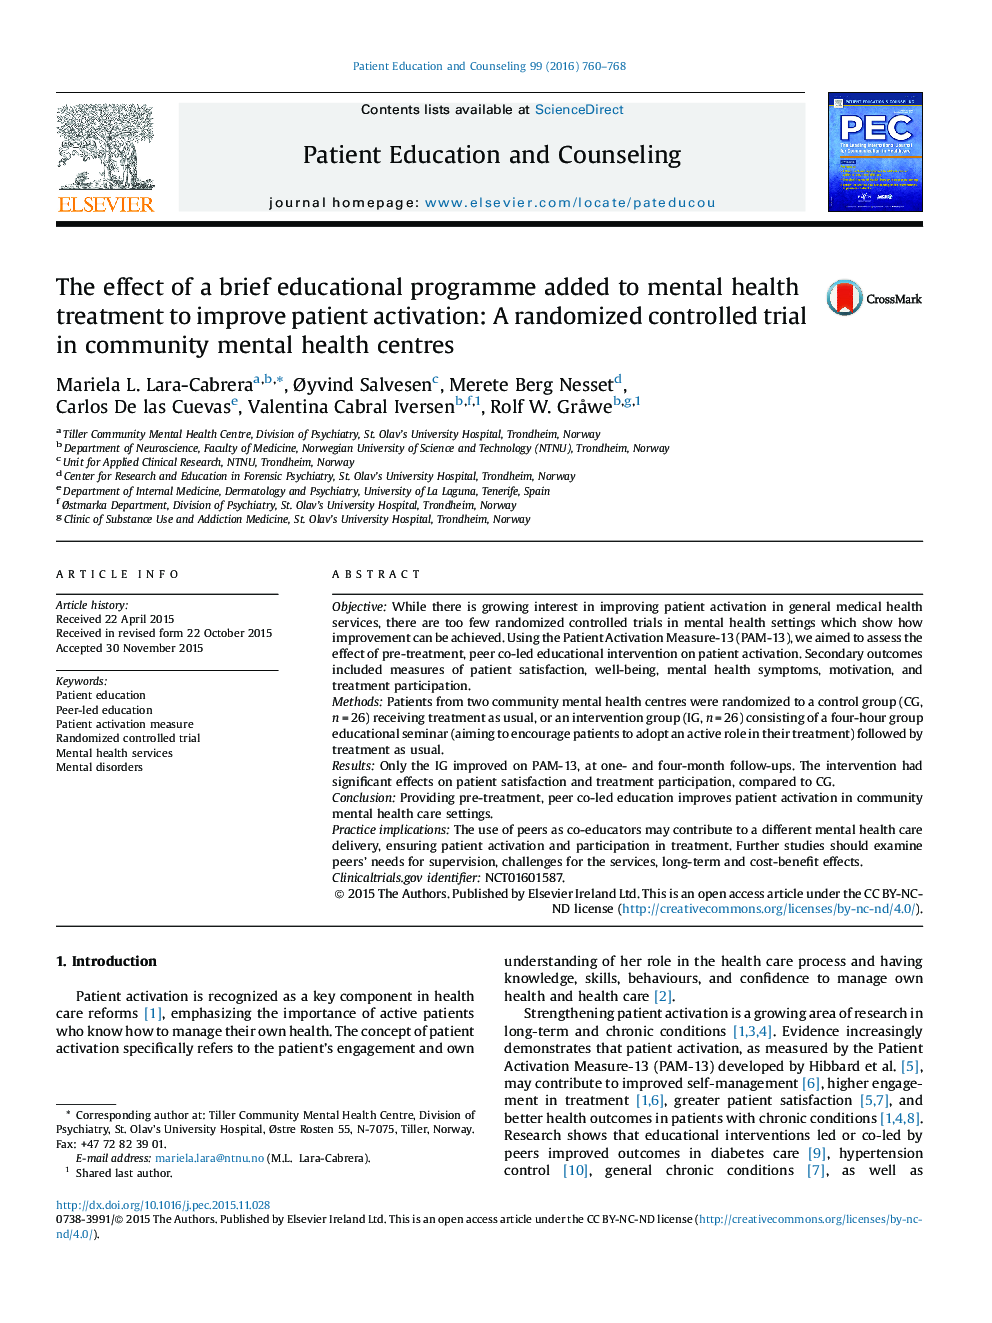 The effect of a brief educational programme added to mental health treatment to improve patient activation: A randomized controlled trial in community mental health centres